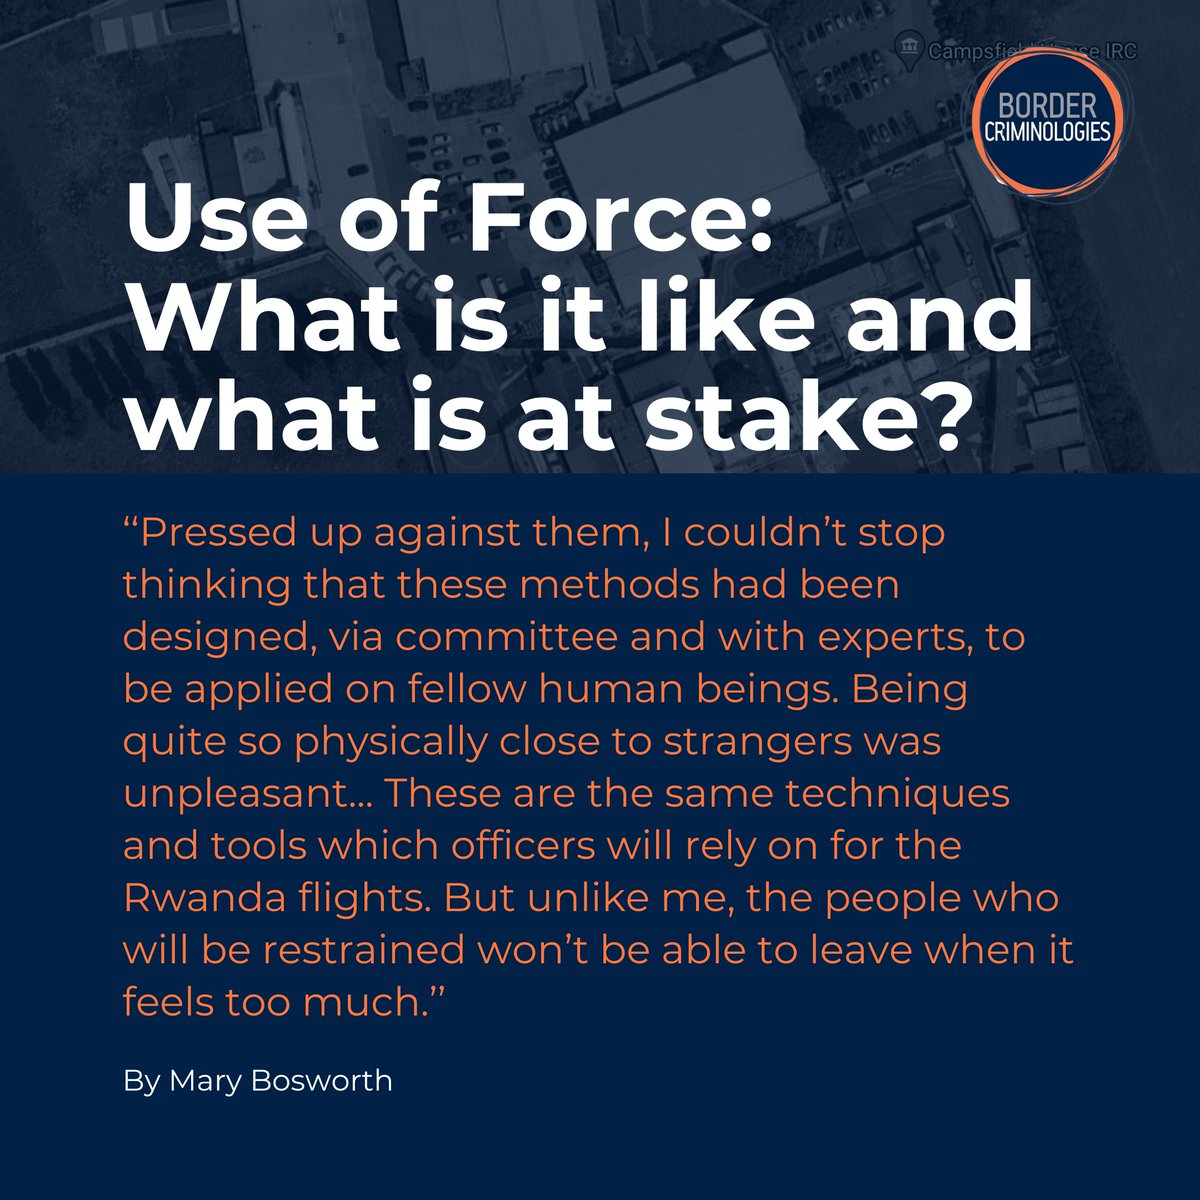 [New Blog 🖊️] Prof. Mary Bosworth exposes UK gov's use-of-force training for officers tasked with escorting #migrants on forced #deportation flights to #Rwanda. Training emphasises waist restraint belts - touted as gentle, but coercive in reality: blogs.law.ox.ac.uk/border-crimino…